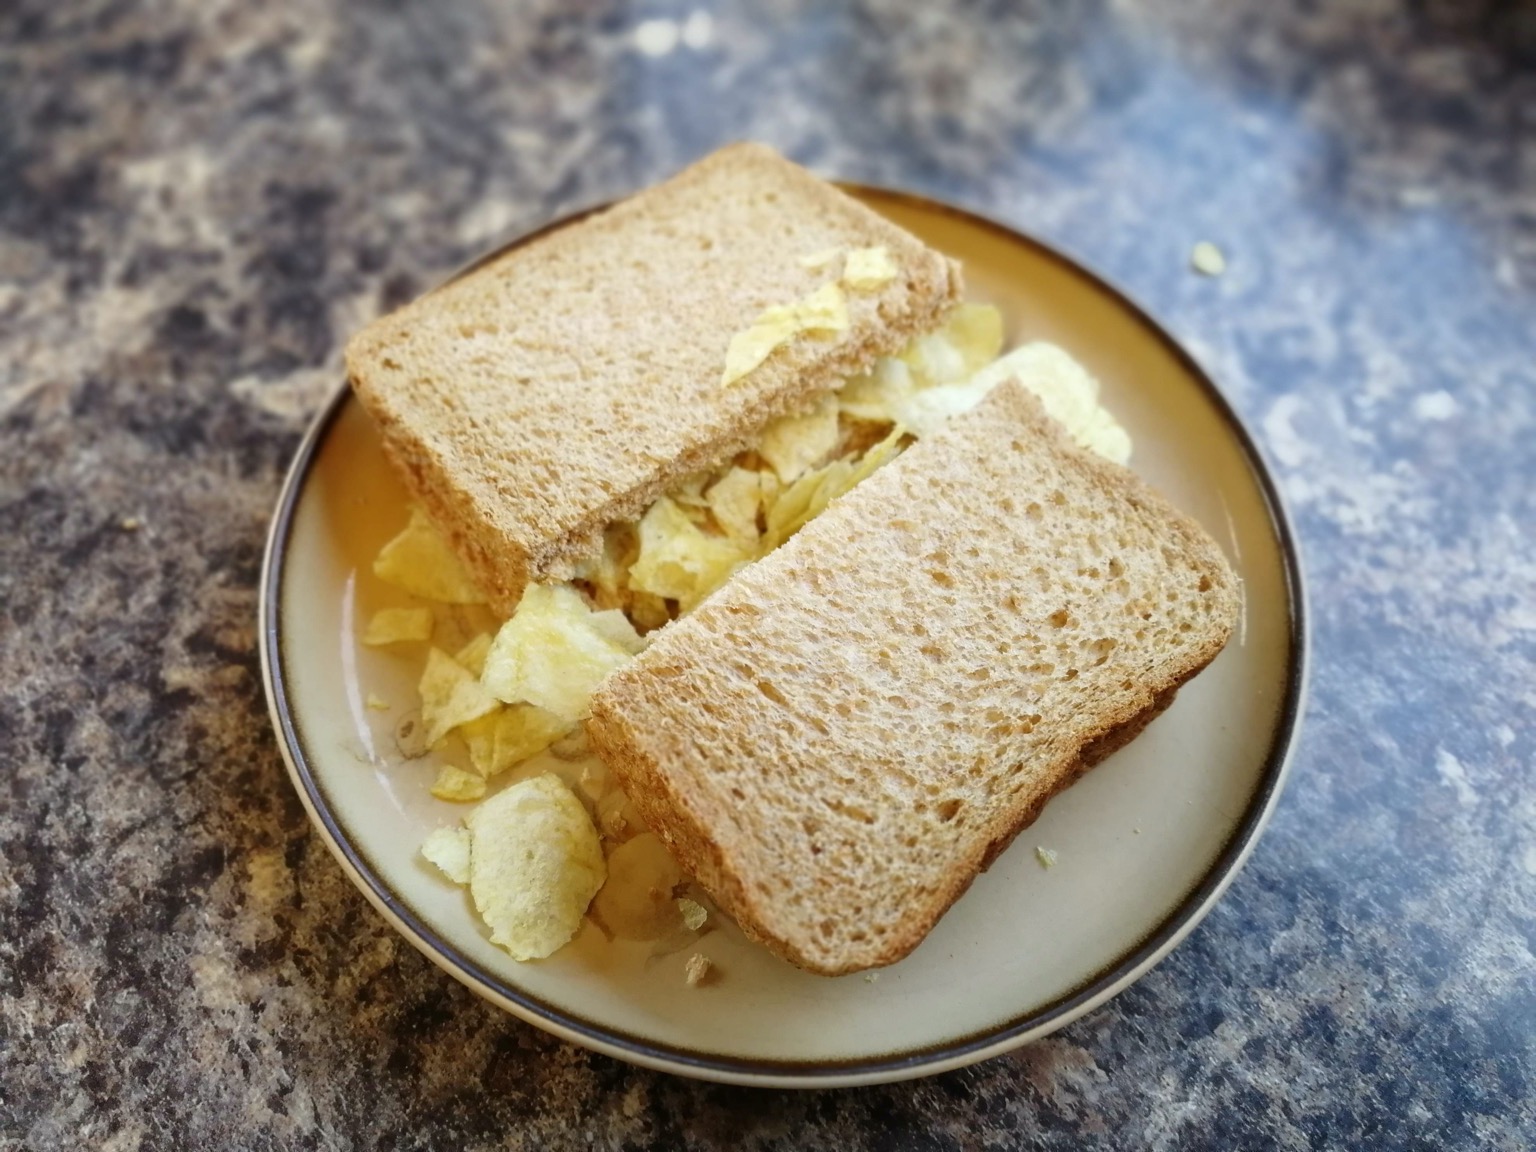 Halved brown bread sandwich over-filled with crisps